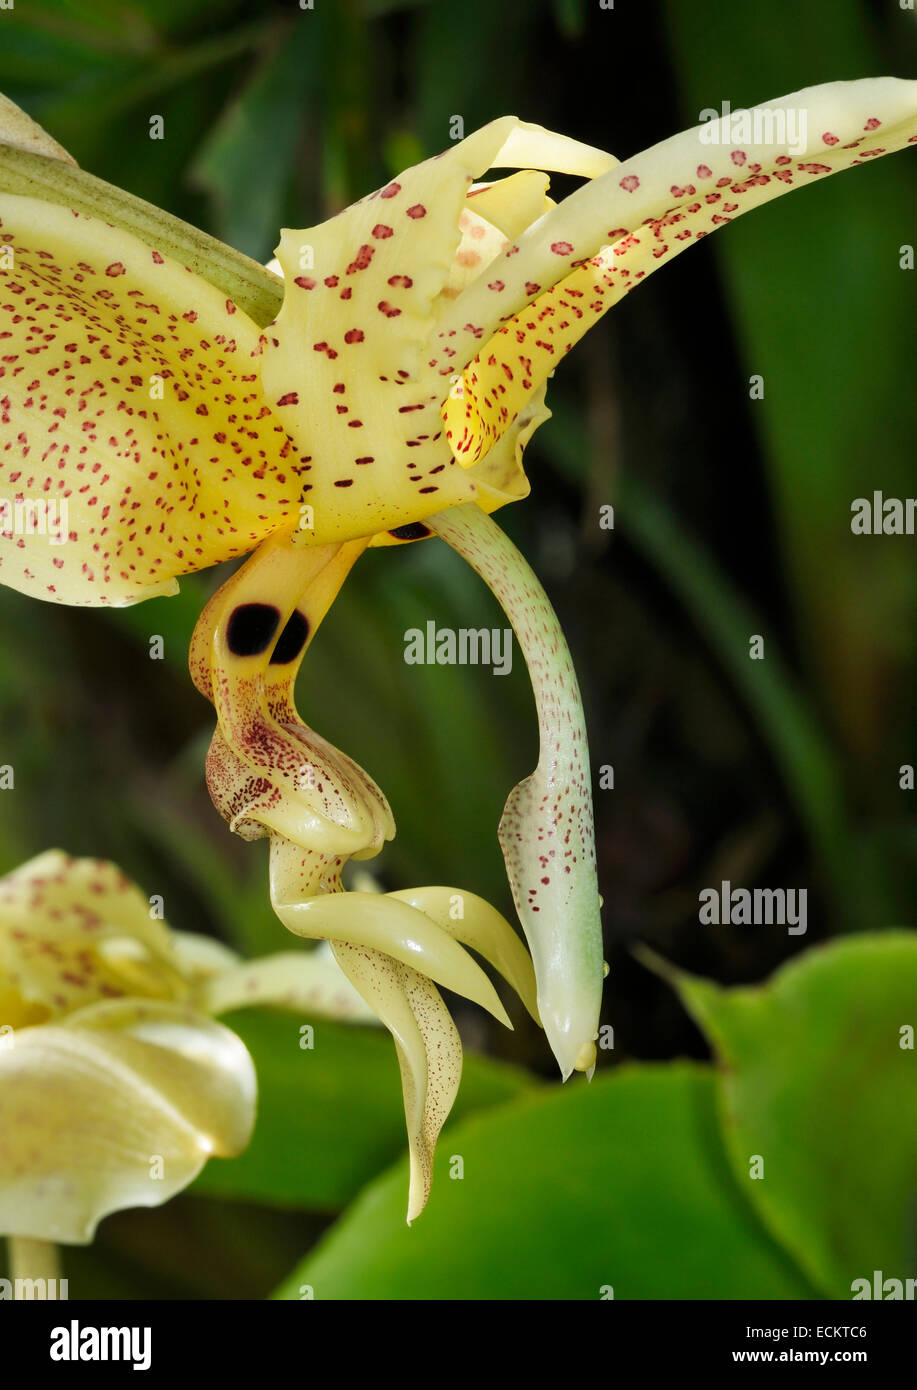 Eye-Spot Stanhopea Orchid - Stanhopea oculata Grows on soil cliffs and in humid forest trees in Mexico to Honduras as well as Co Stock Photo